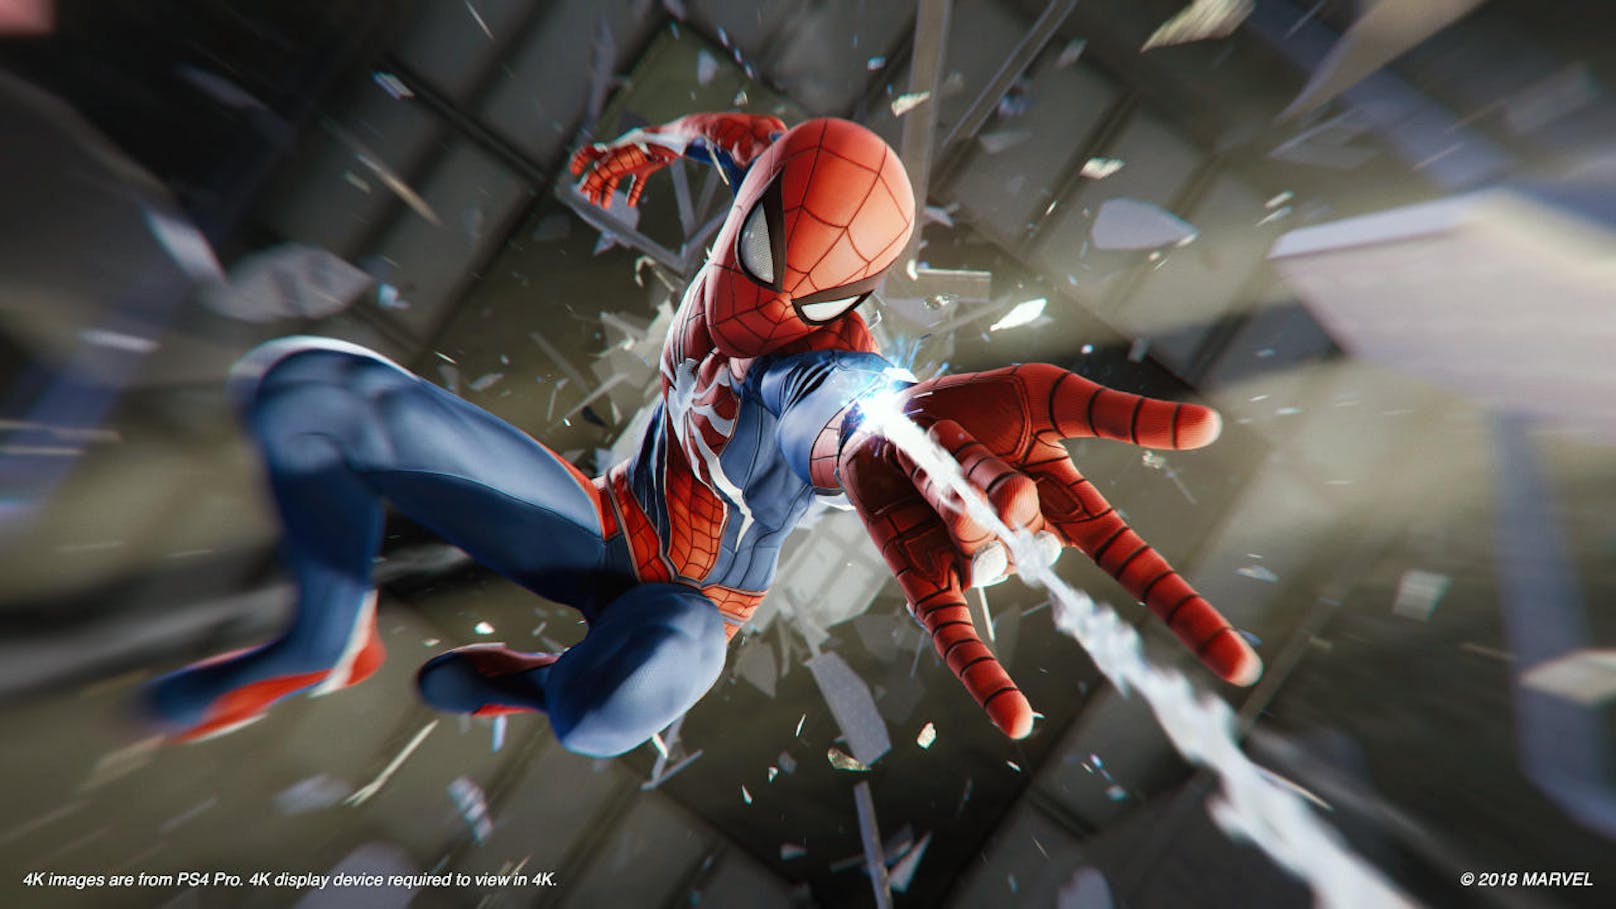  <a href="https://www.heute.at/digital/games/story/Marvels-Spider-Man-PlayStation4-PS4-Test-Review-Insomniac-Games-Sony-42519981" target="_blank">Marvel's Spider-Man</a>